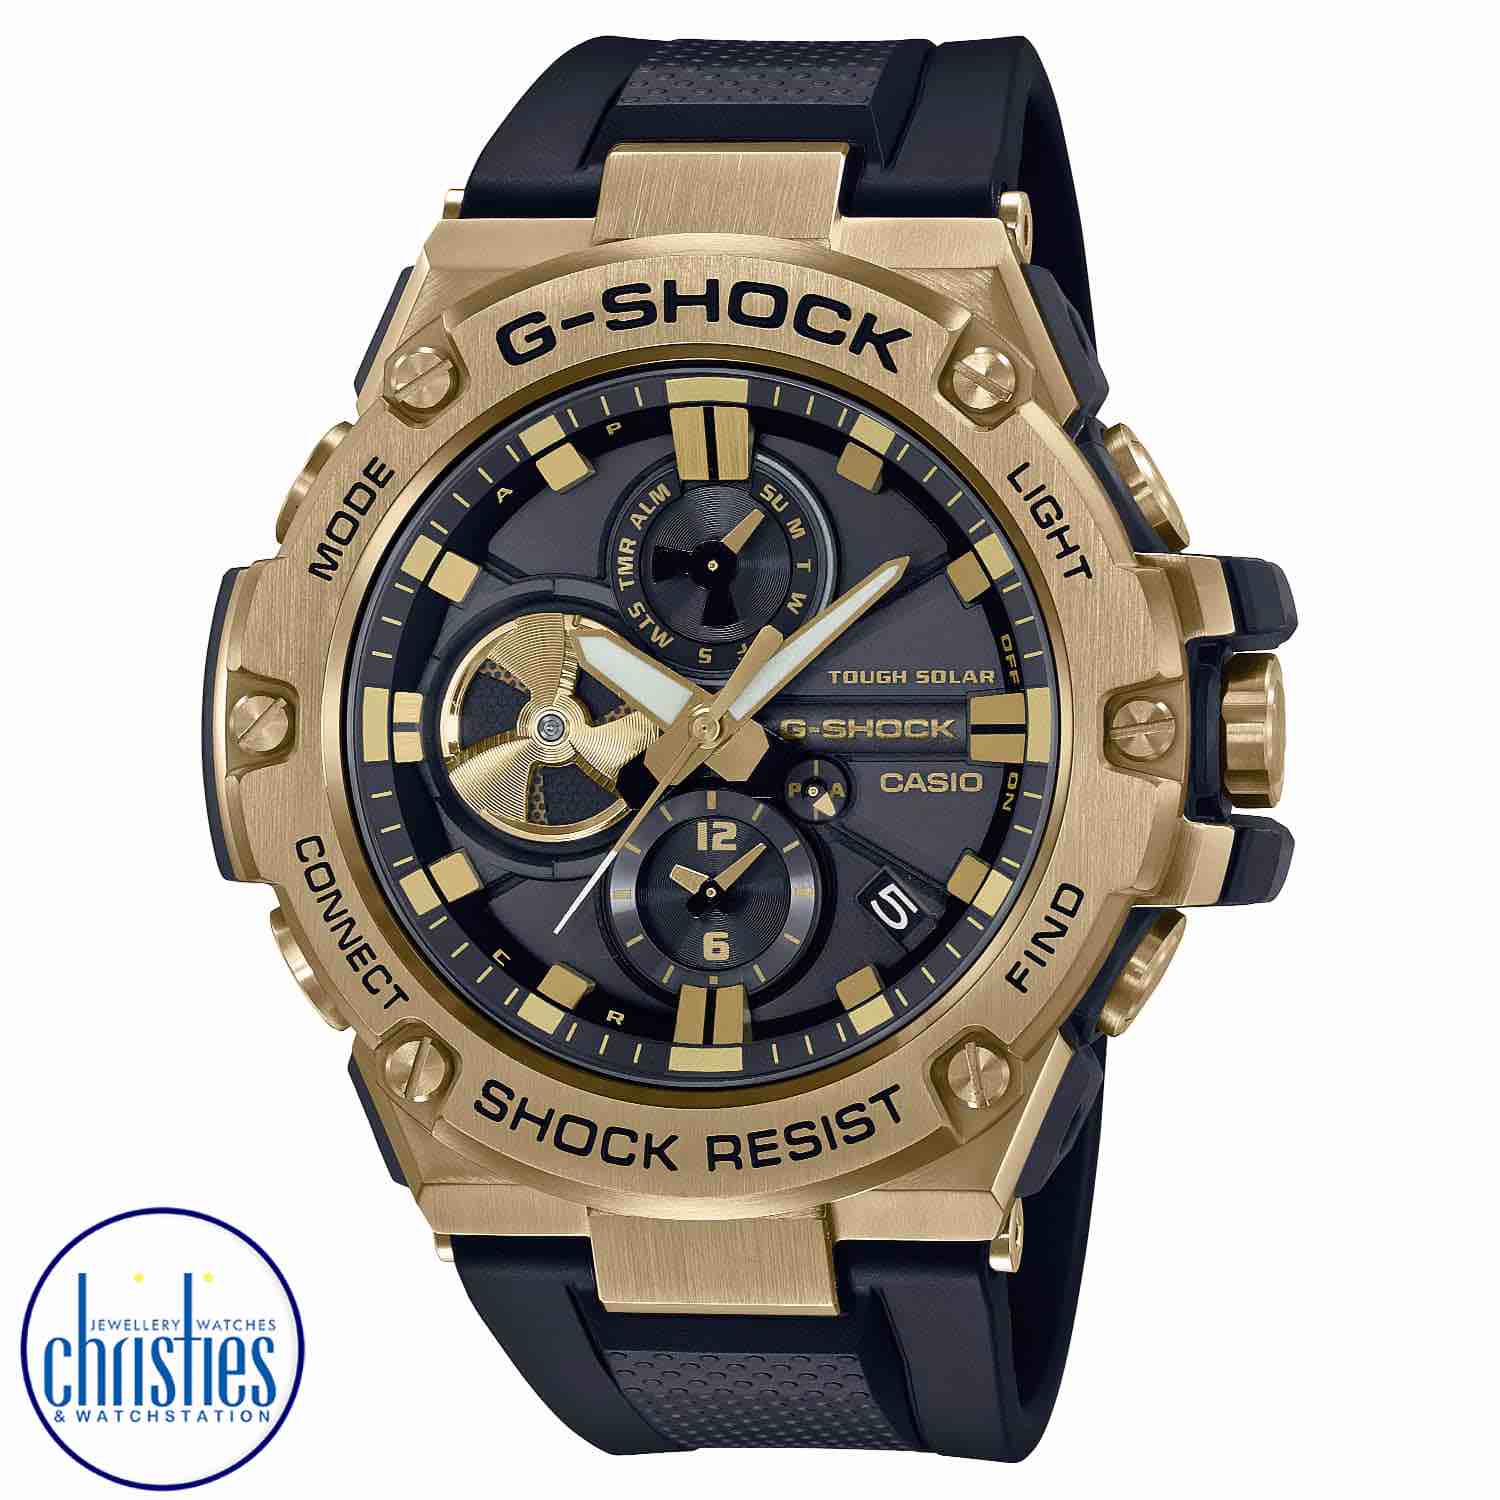 GSTB100GB-1A9 G-Shock G-STEEL Smartphone Link Tough Solar Watch. Revel in the eclectic G-STEEL combination of metal and resin components in an ever-popular colour scheme of black and gold.